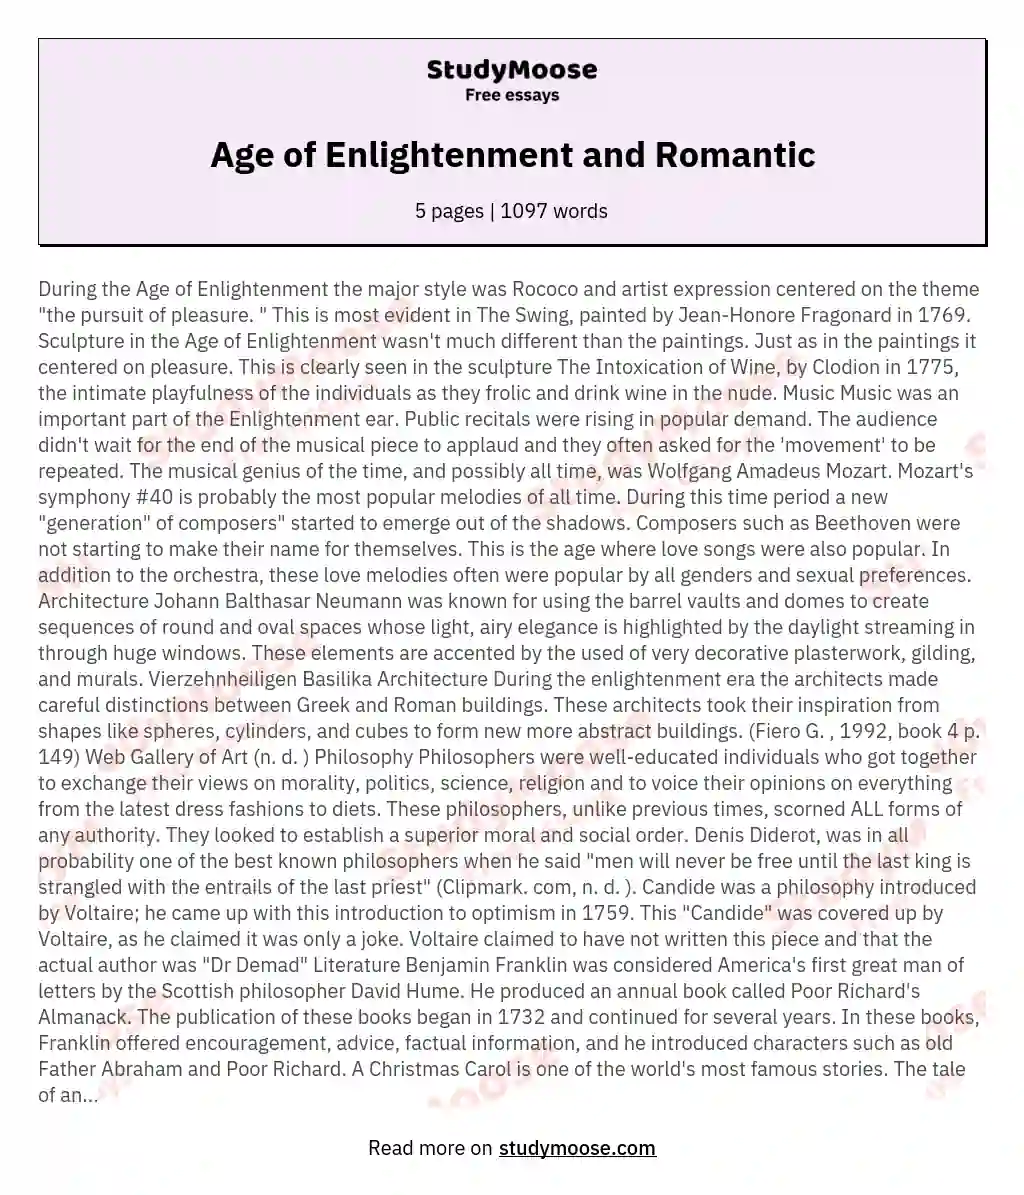 Age of Enlightenment and Romantic essay